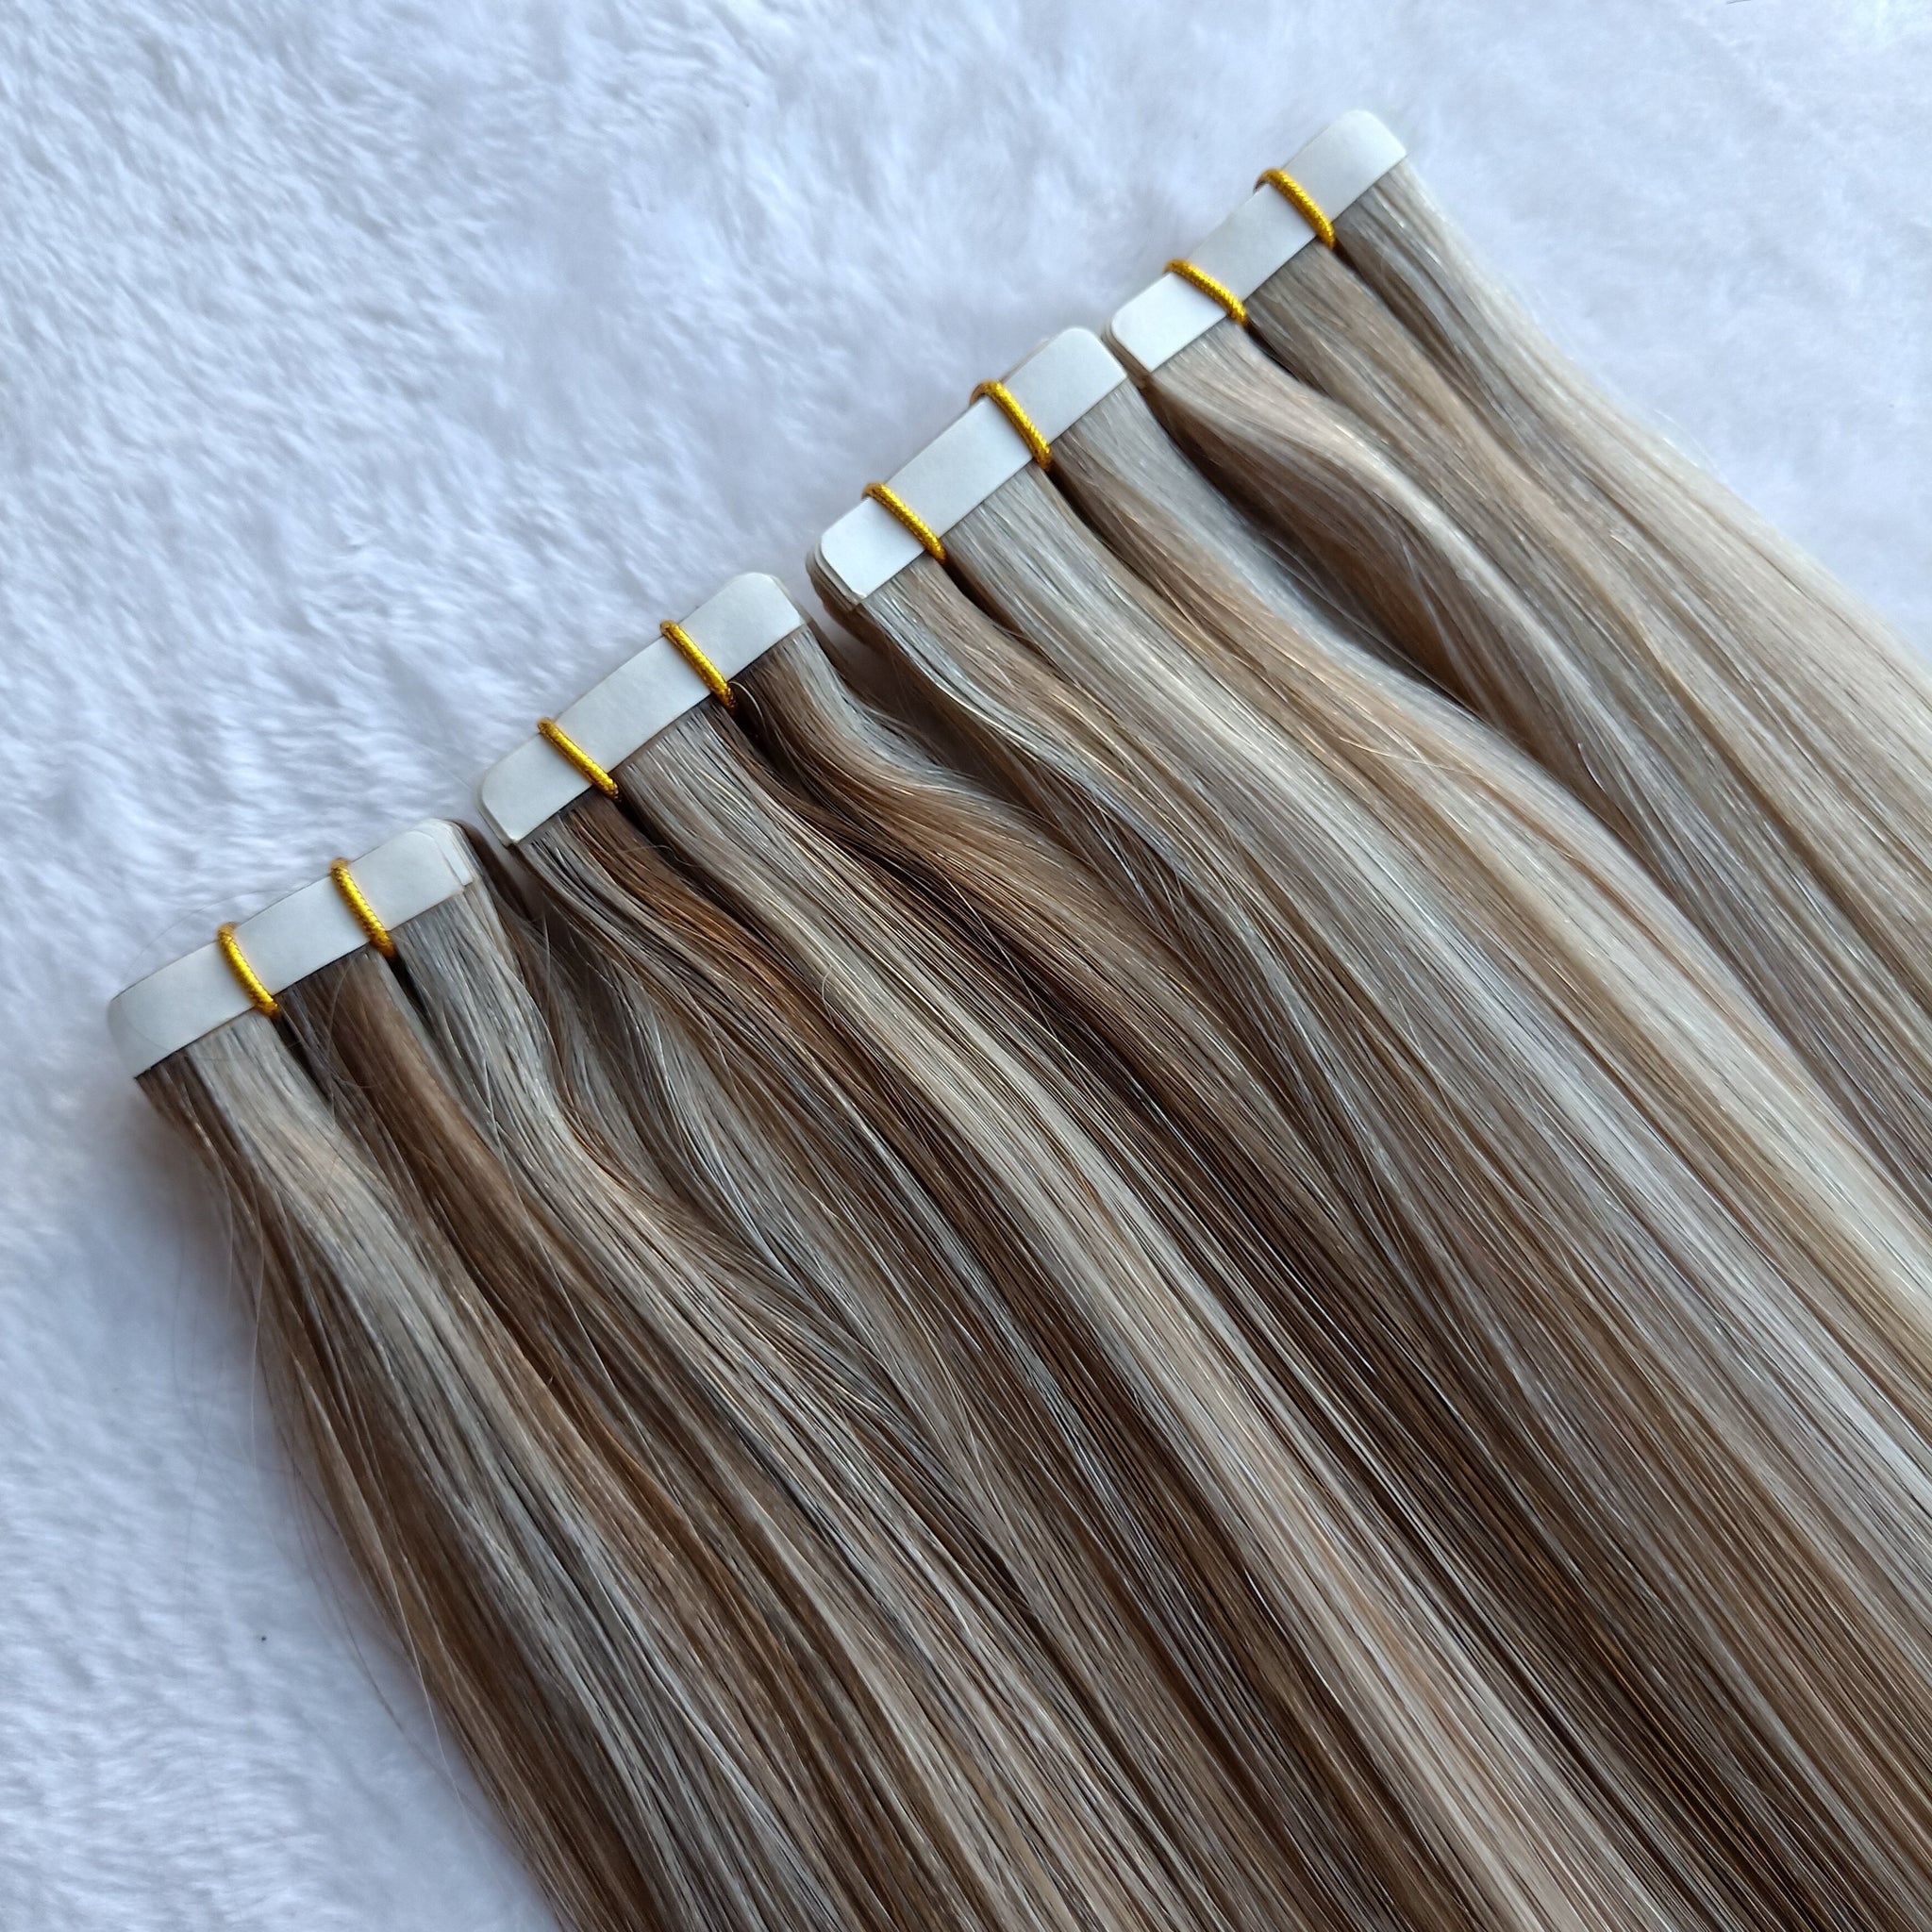 Luxury Quality Tape Hair Extensions - Balayage and Rooted Tape Hair ...